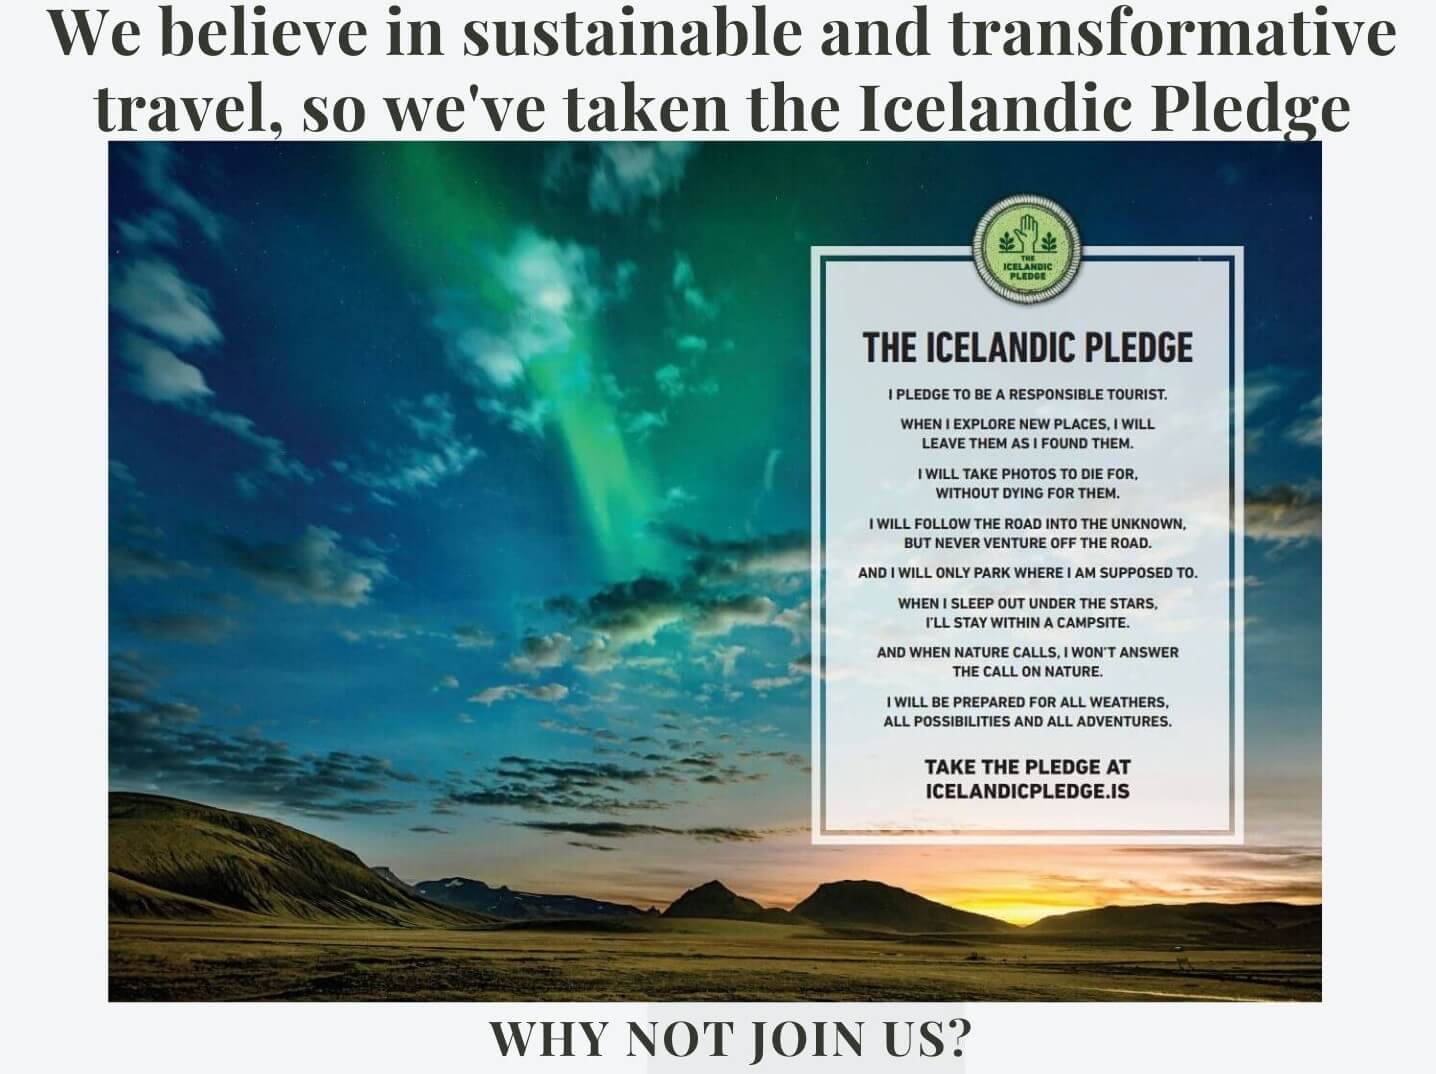 image of the Icelandic Pledge, for an eco-friendly trip to Iceland